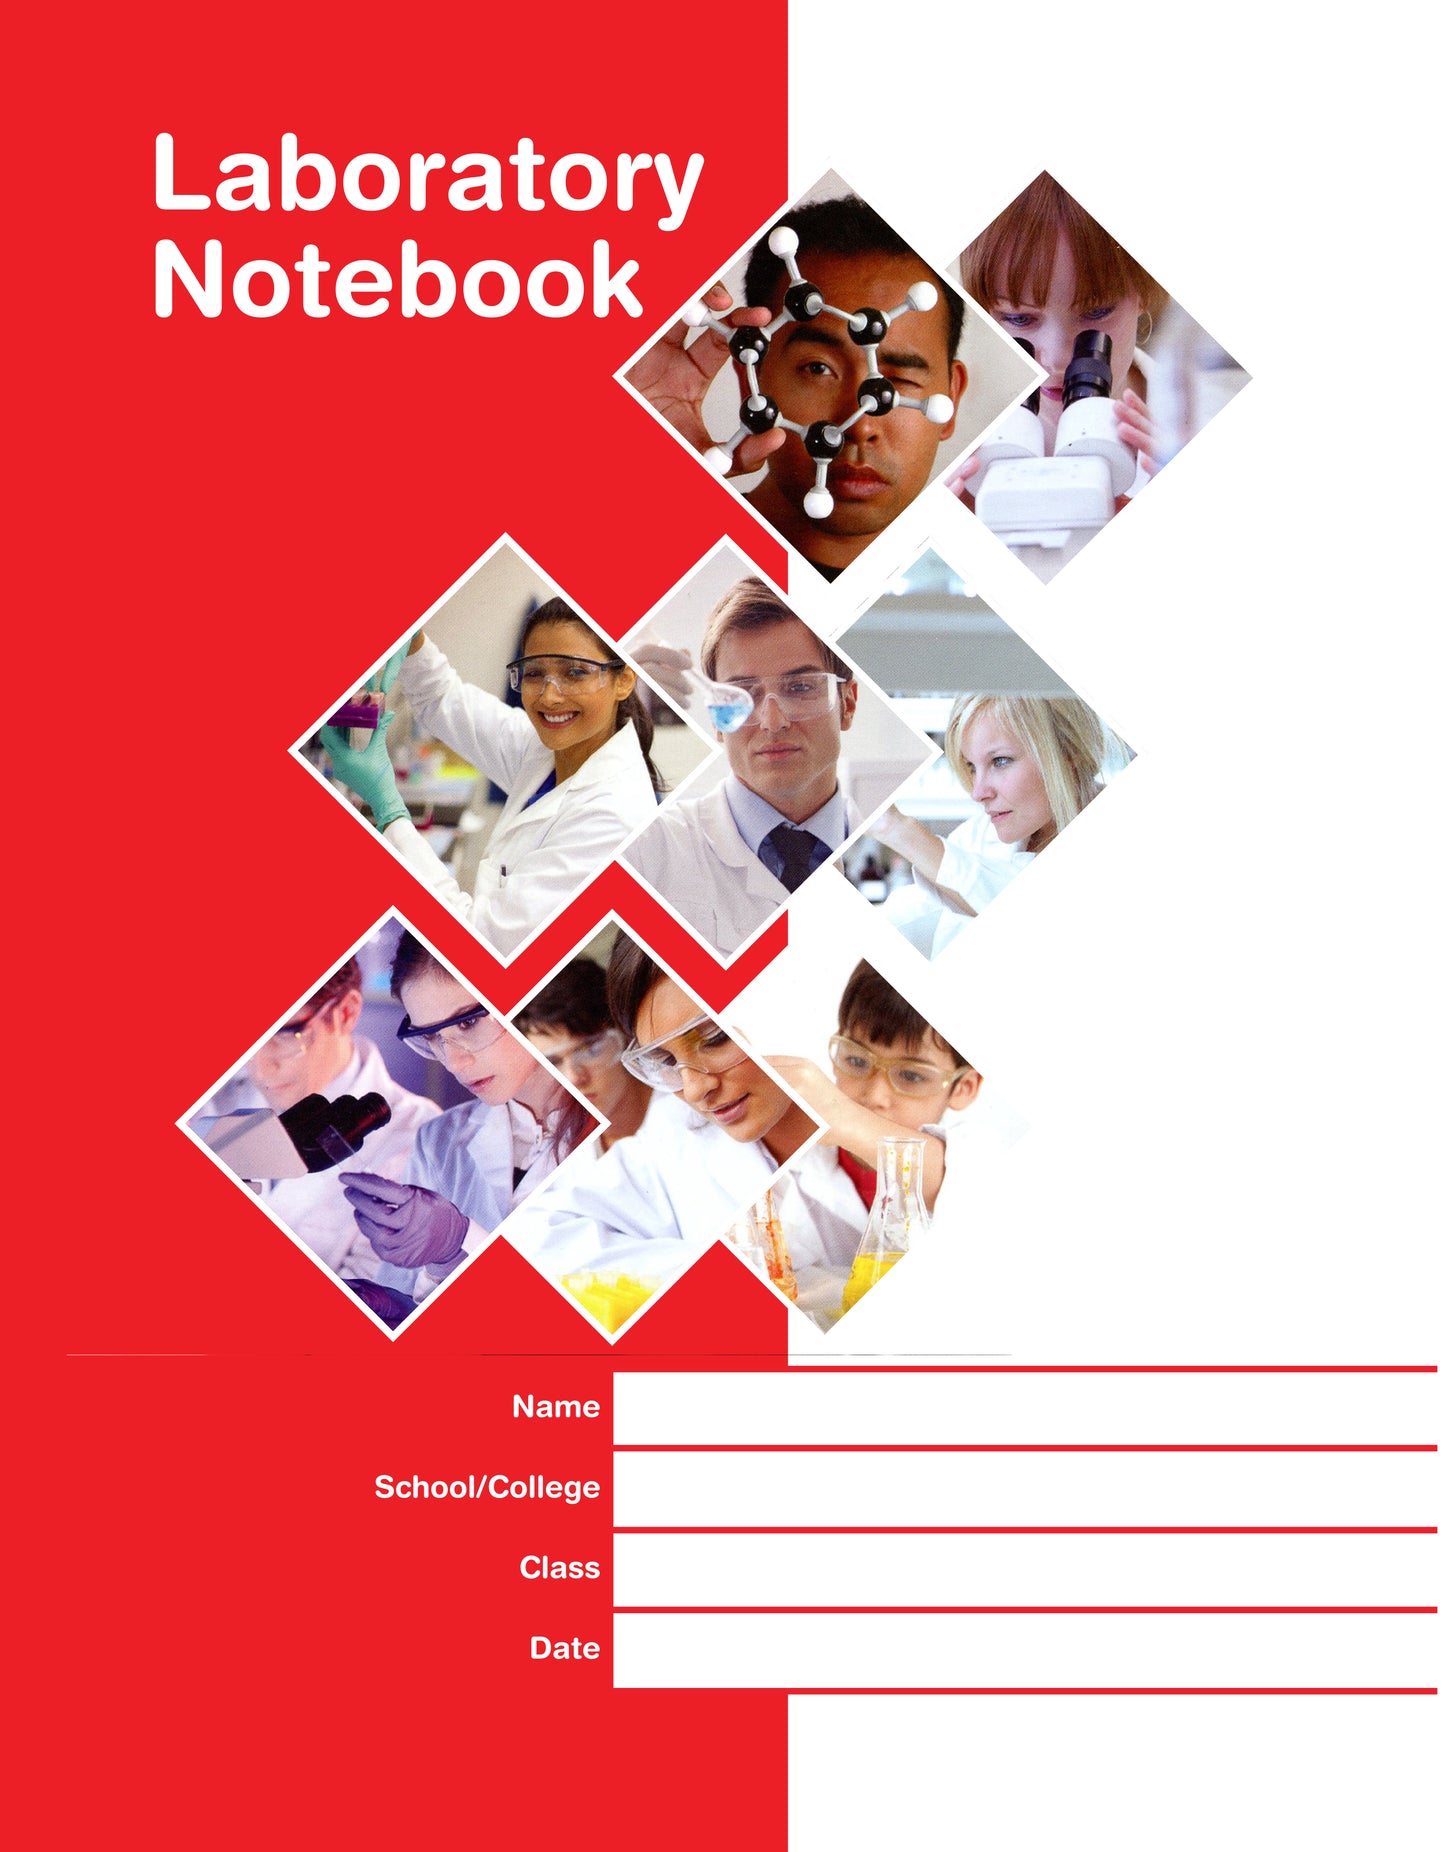 Code S01: A4 laboratory notebook for schools – hardback, 100 numbered leaves in duplicate printed on NCR paper with 6mm ruled line spacing